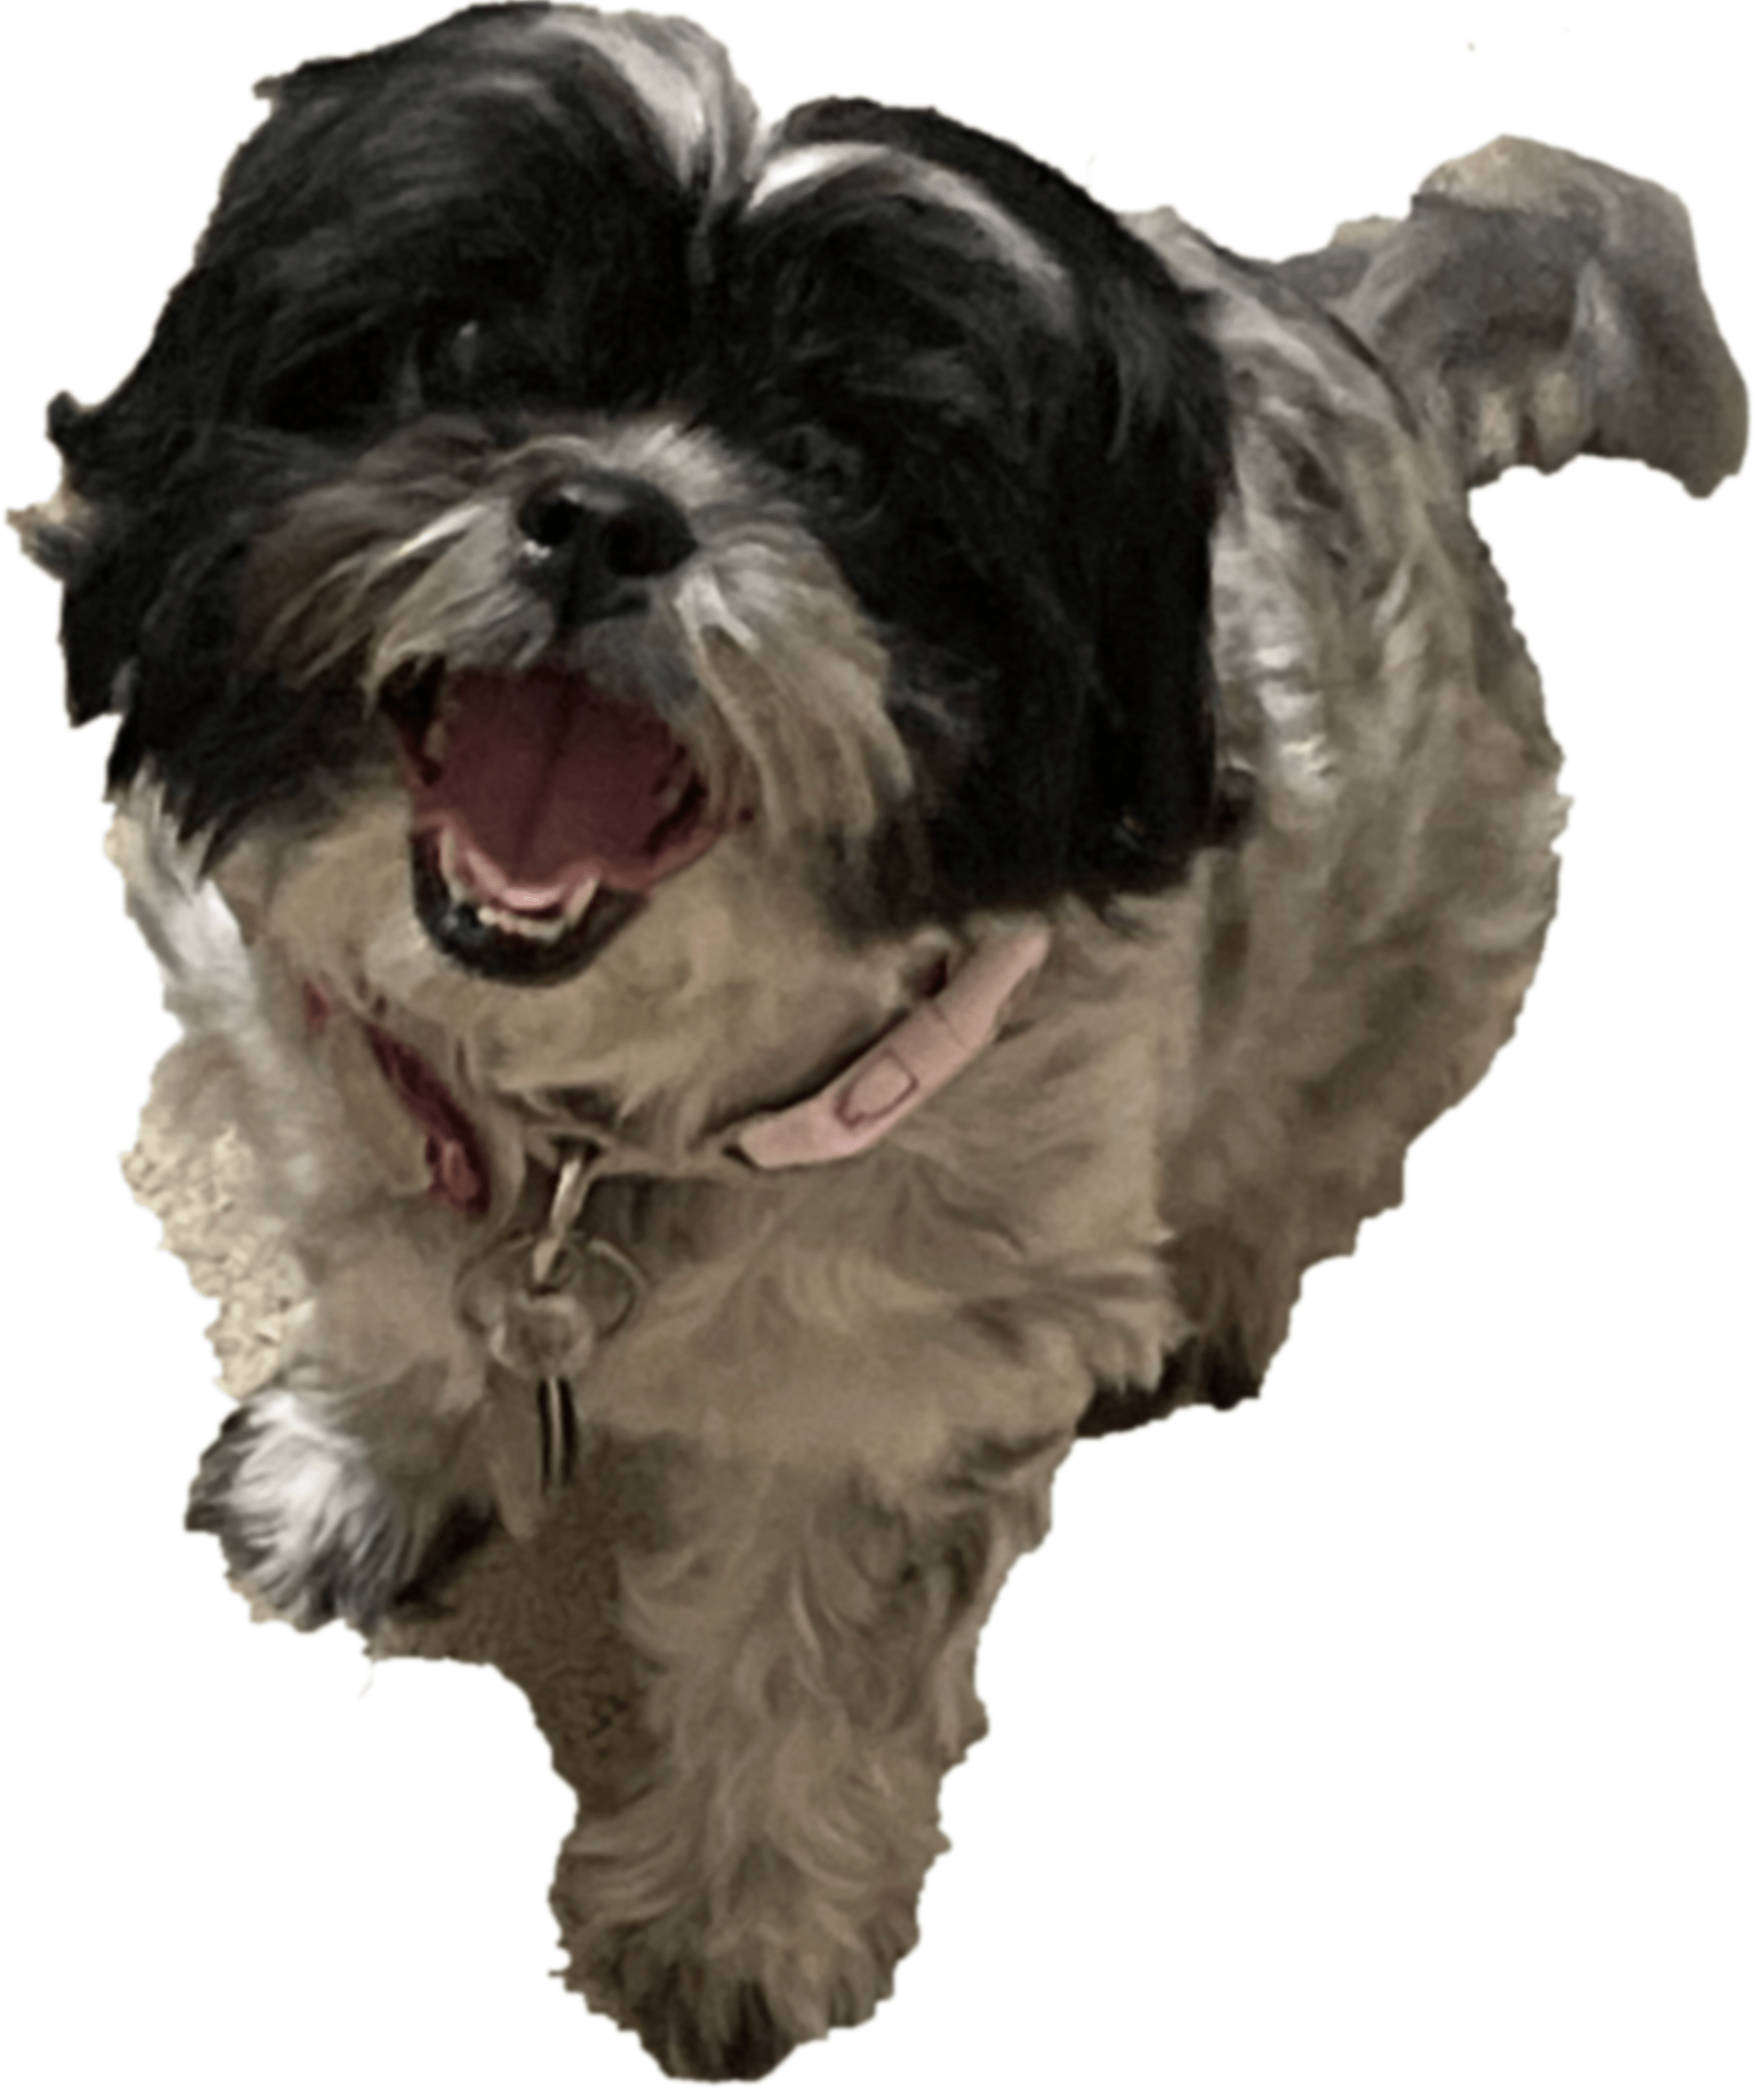 a large picture of a fat and fluffy black-and-white shih tzu with a puppy cut. she has a white and black flecked body and a black head, with a small white puff of fur on her forehead. she appears to be smiling at the camera, her mouth open to reveal an underbite and a pink tongue. the cursor changes to a hand when the image is hovered over.